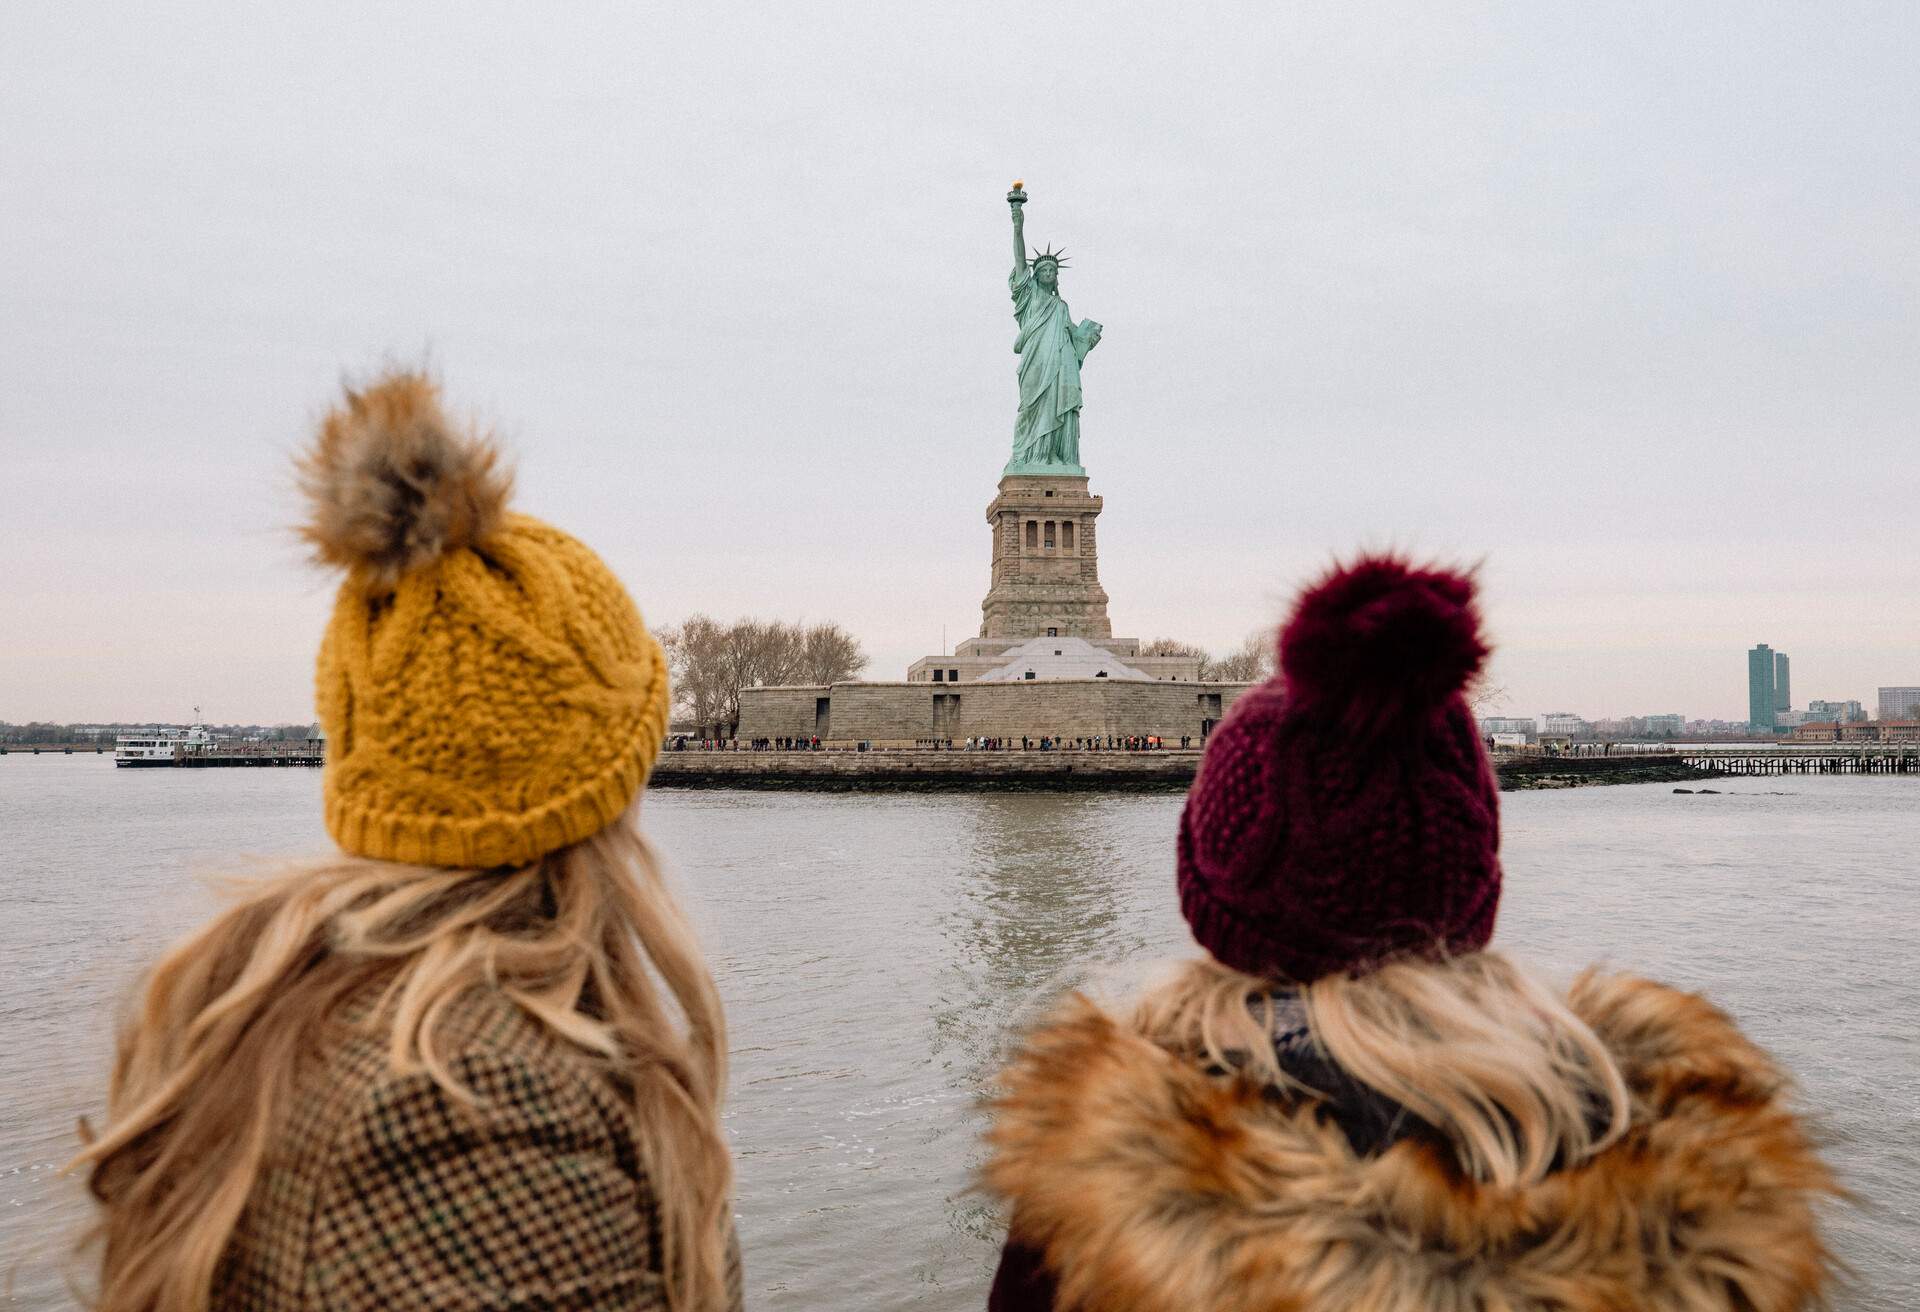 Two blonde women in black and yellow bonnet stare at the Statue of Liberty on an island.